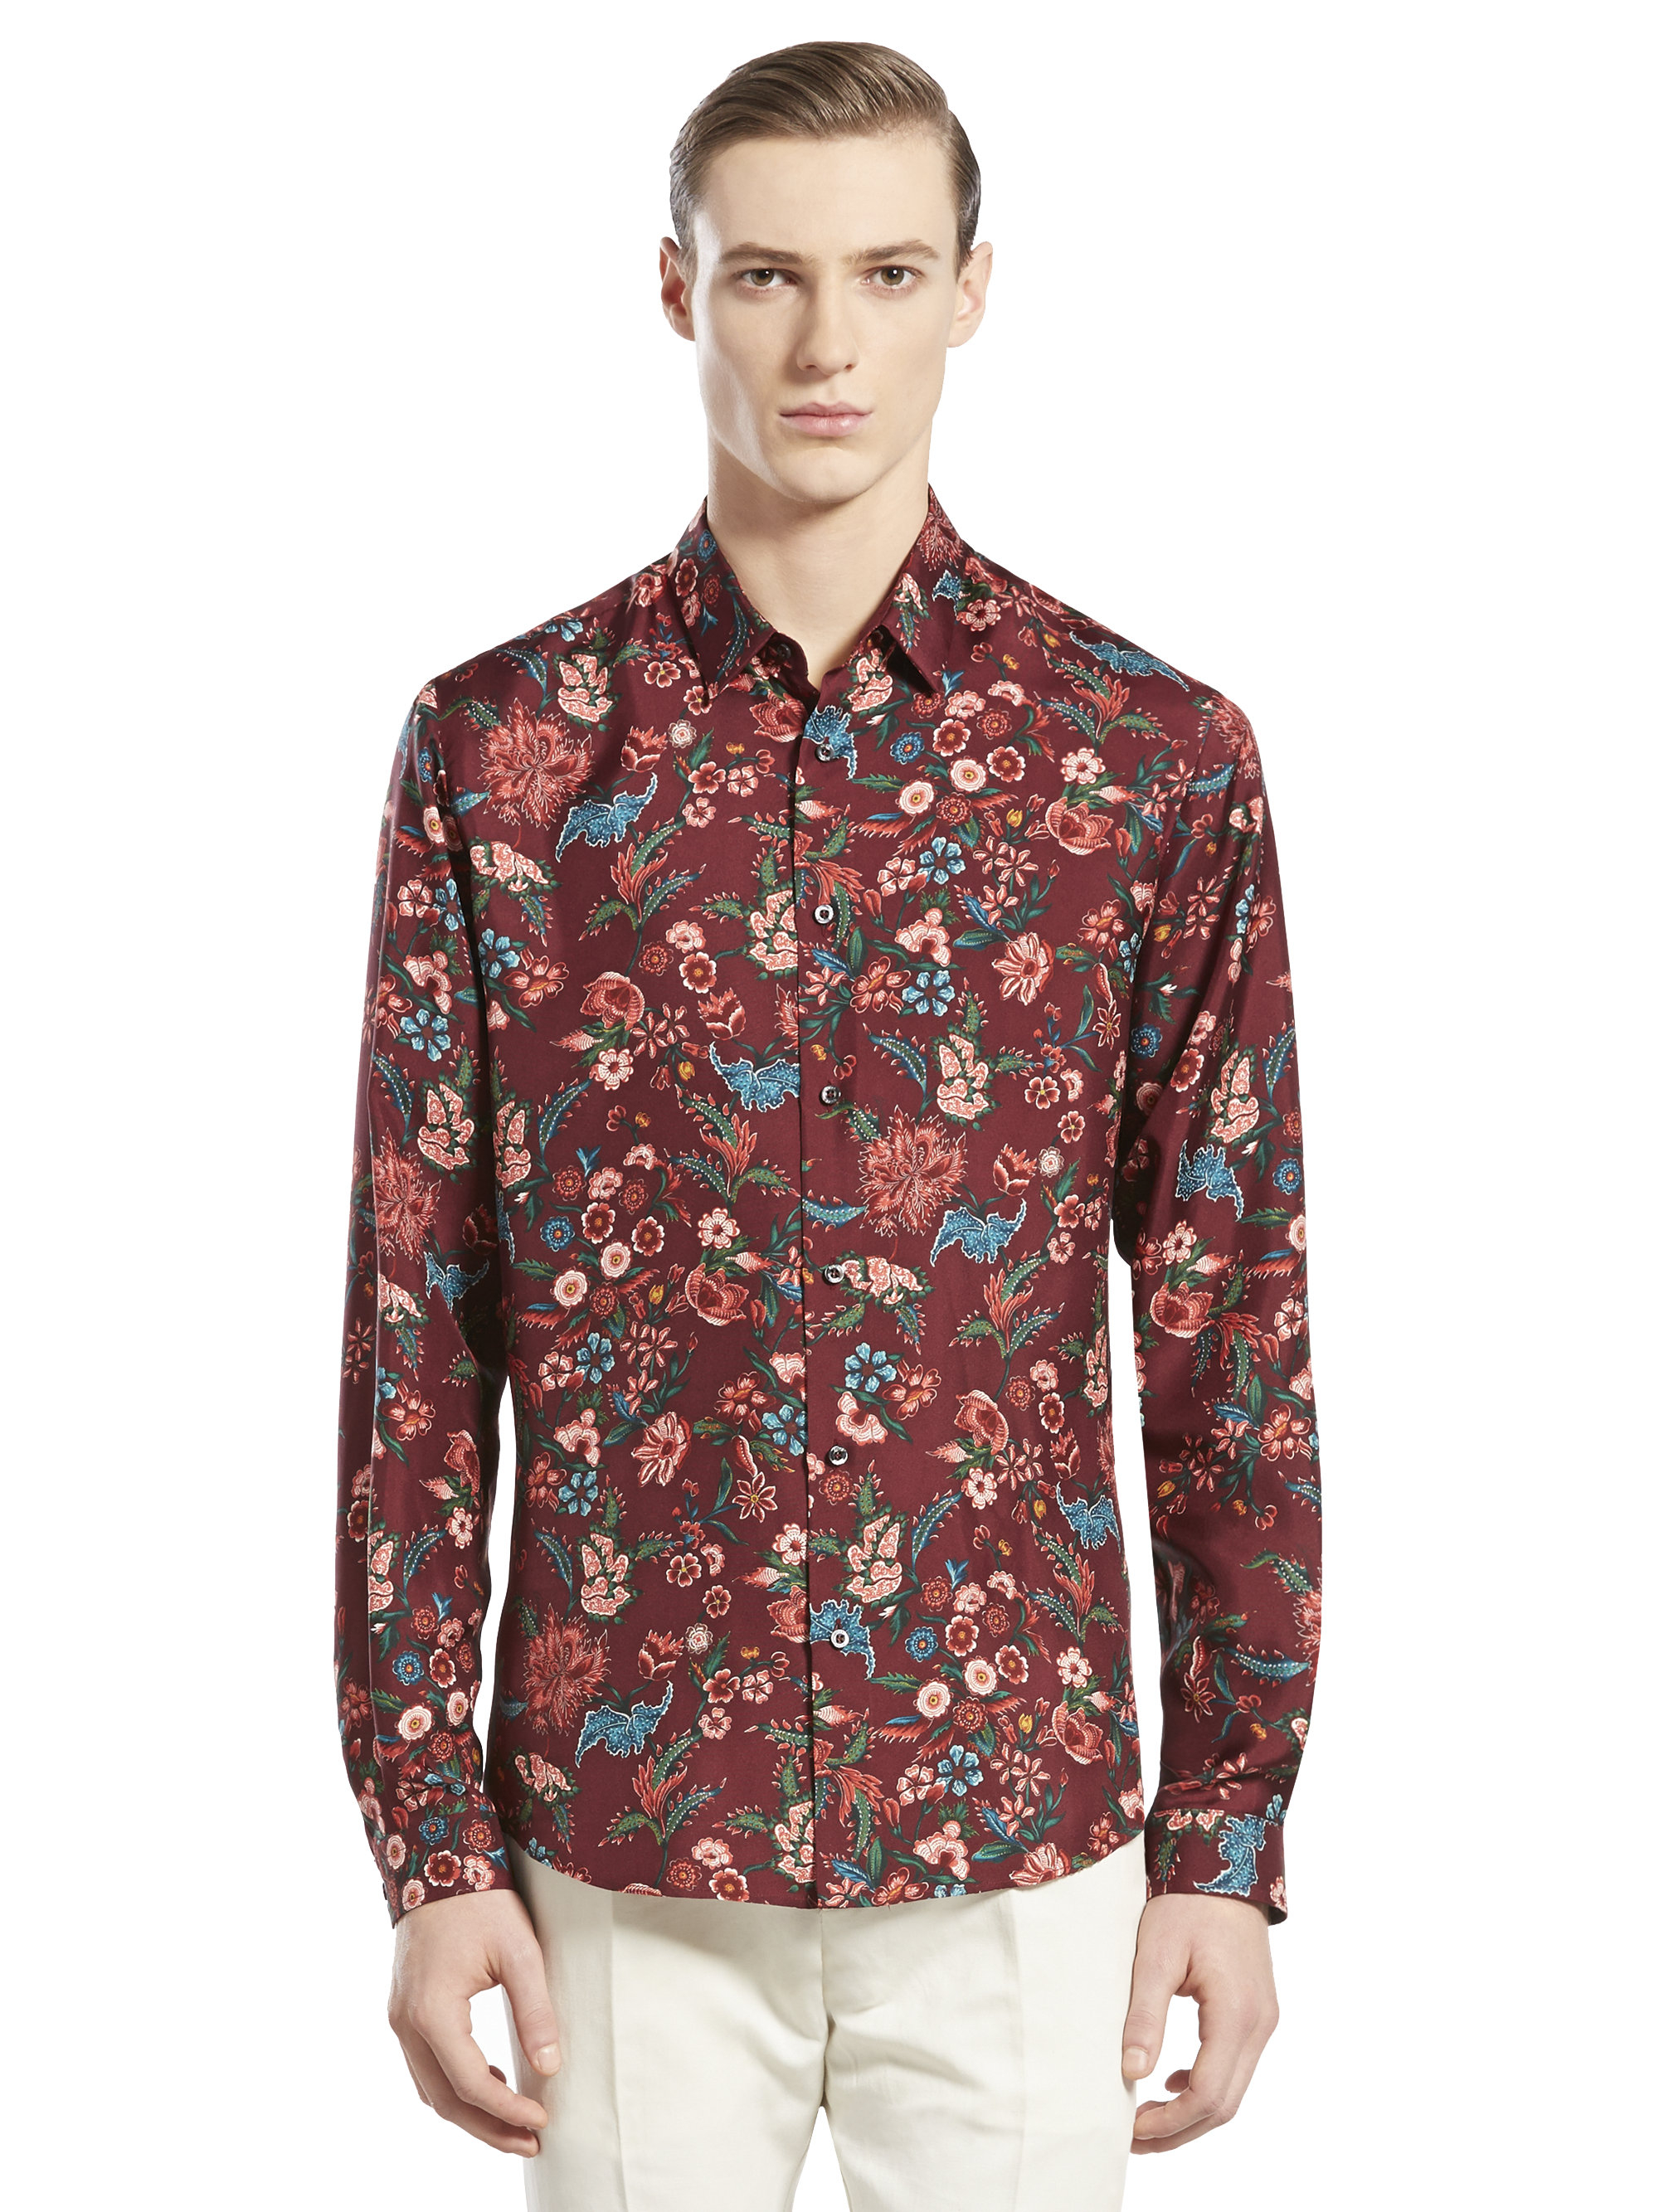 Lyst - Gucci Floral Pattern Woven Shirt in Red for Men